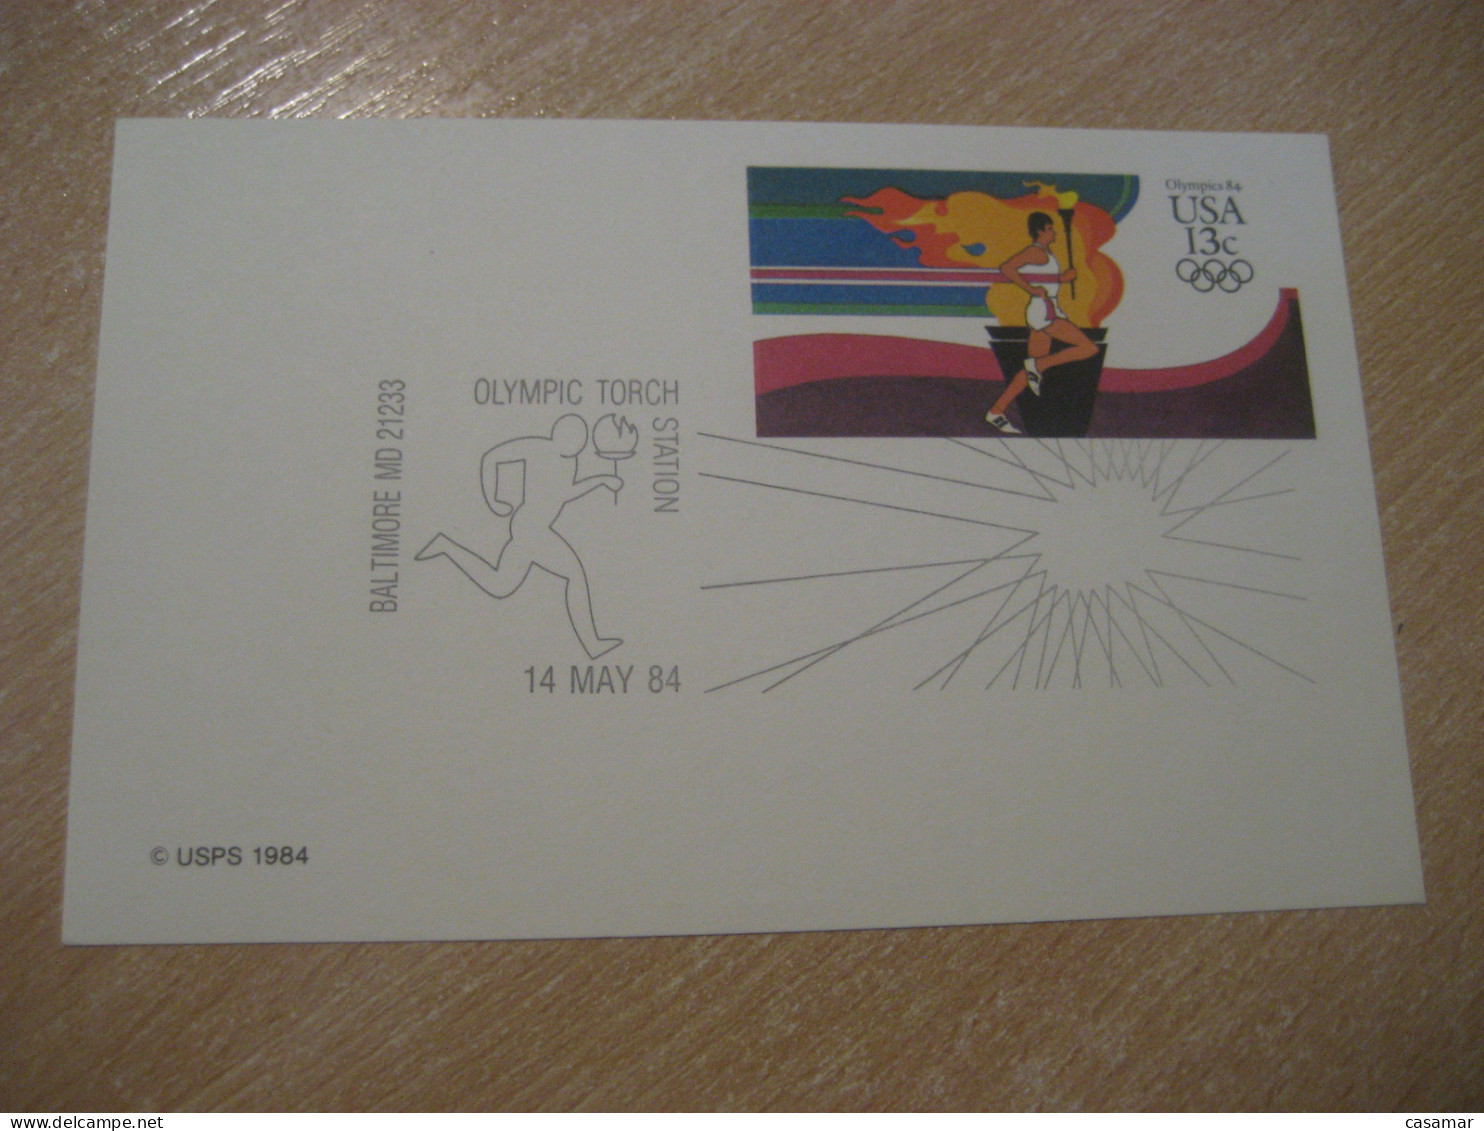 BALTIMORE 1984 Olympic Torch Los Angeles Olympic Games Olympics Cancel Postal Stationery Card USA - Verano 1984: Los Angeles